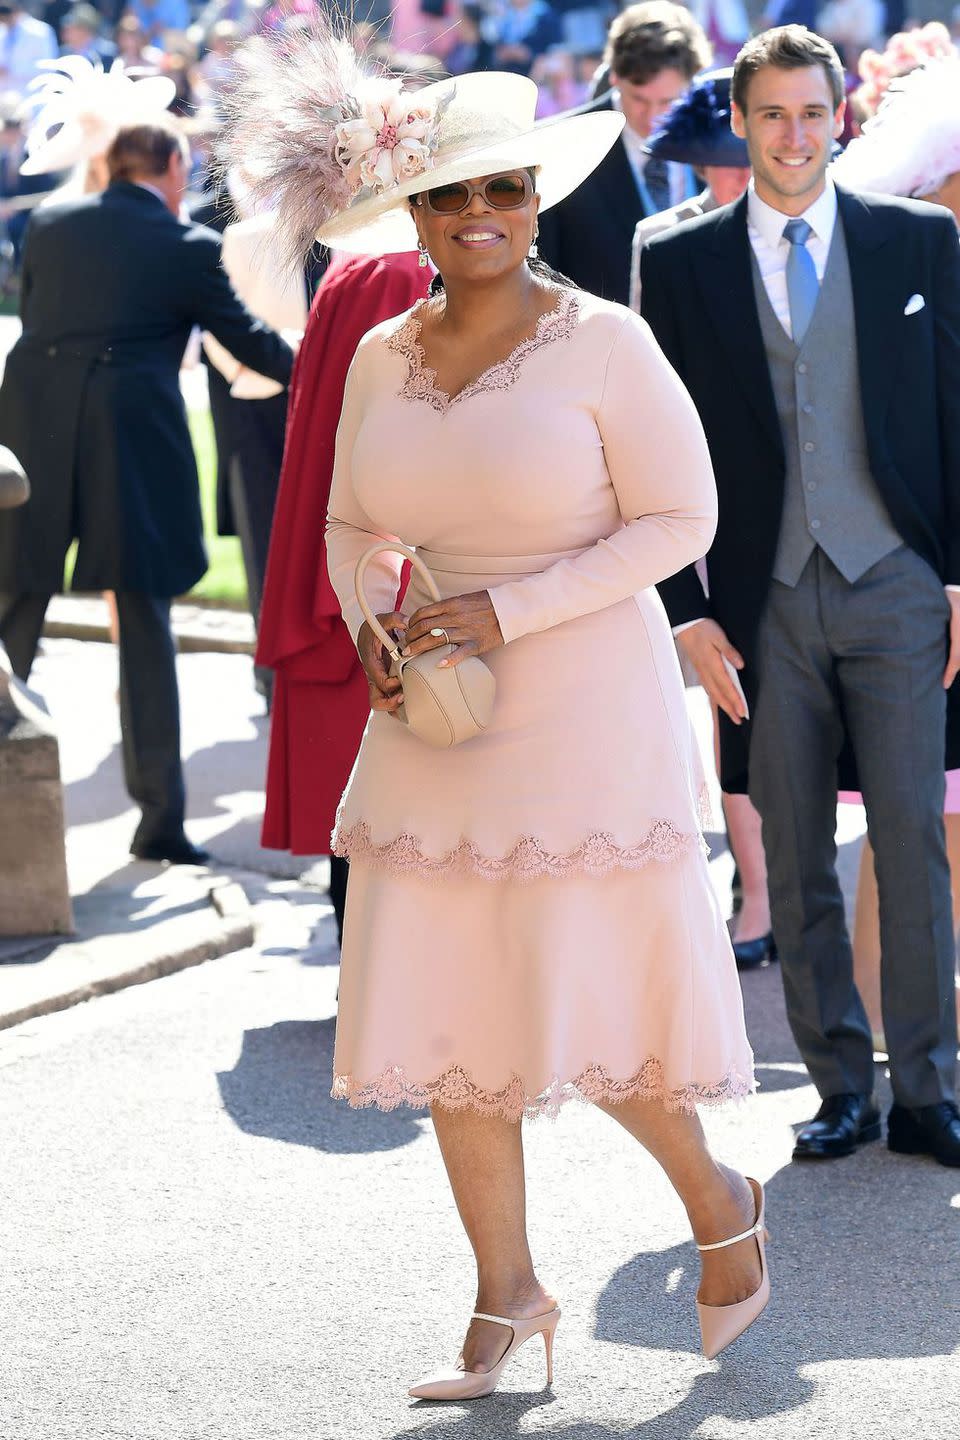 Oprah says the Duchess of Sussex is being treated "unfairly" by the press